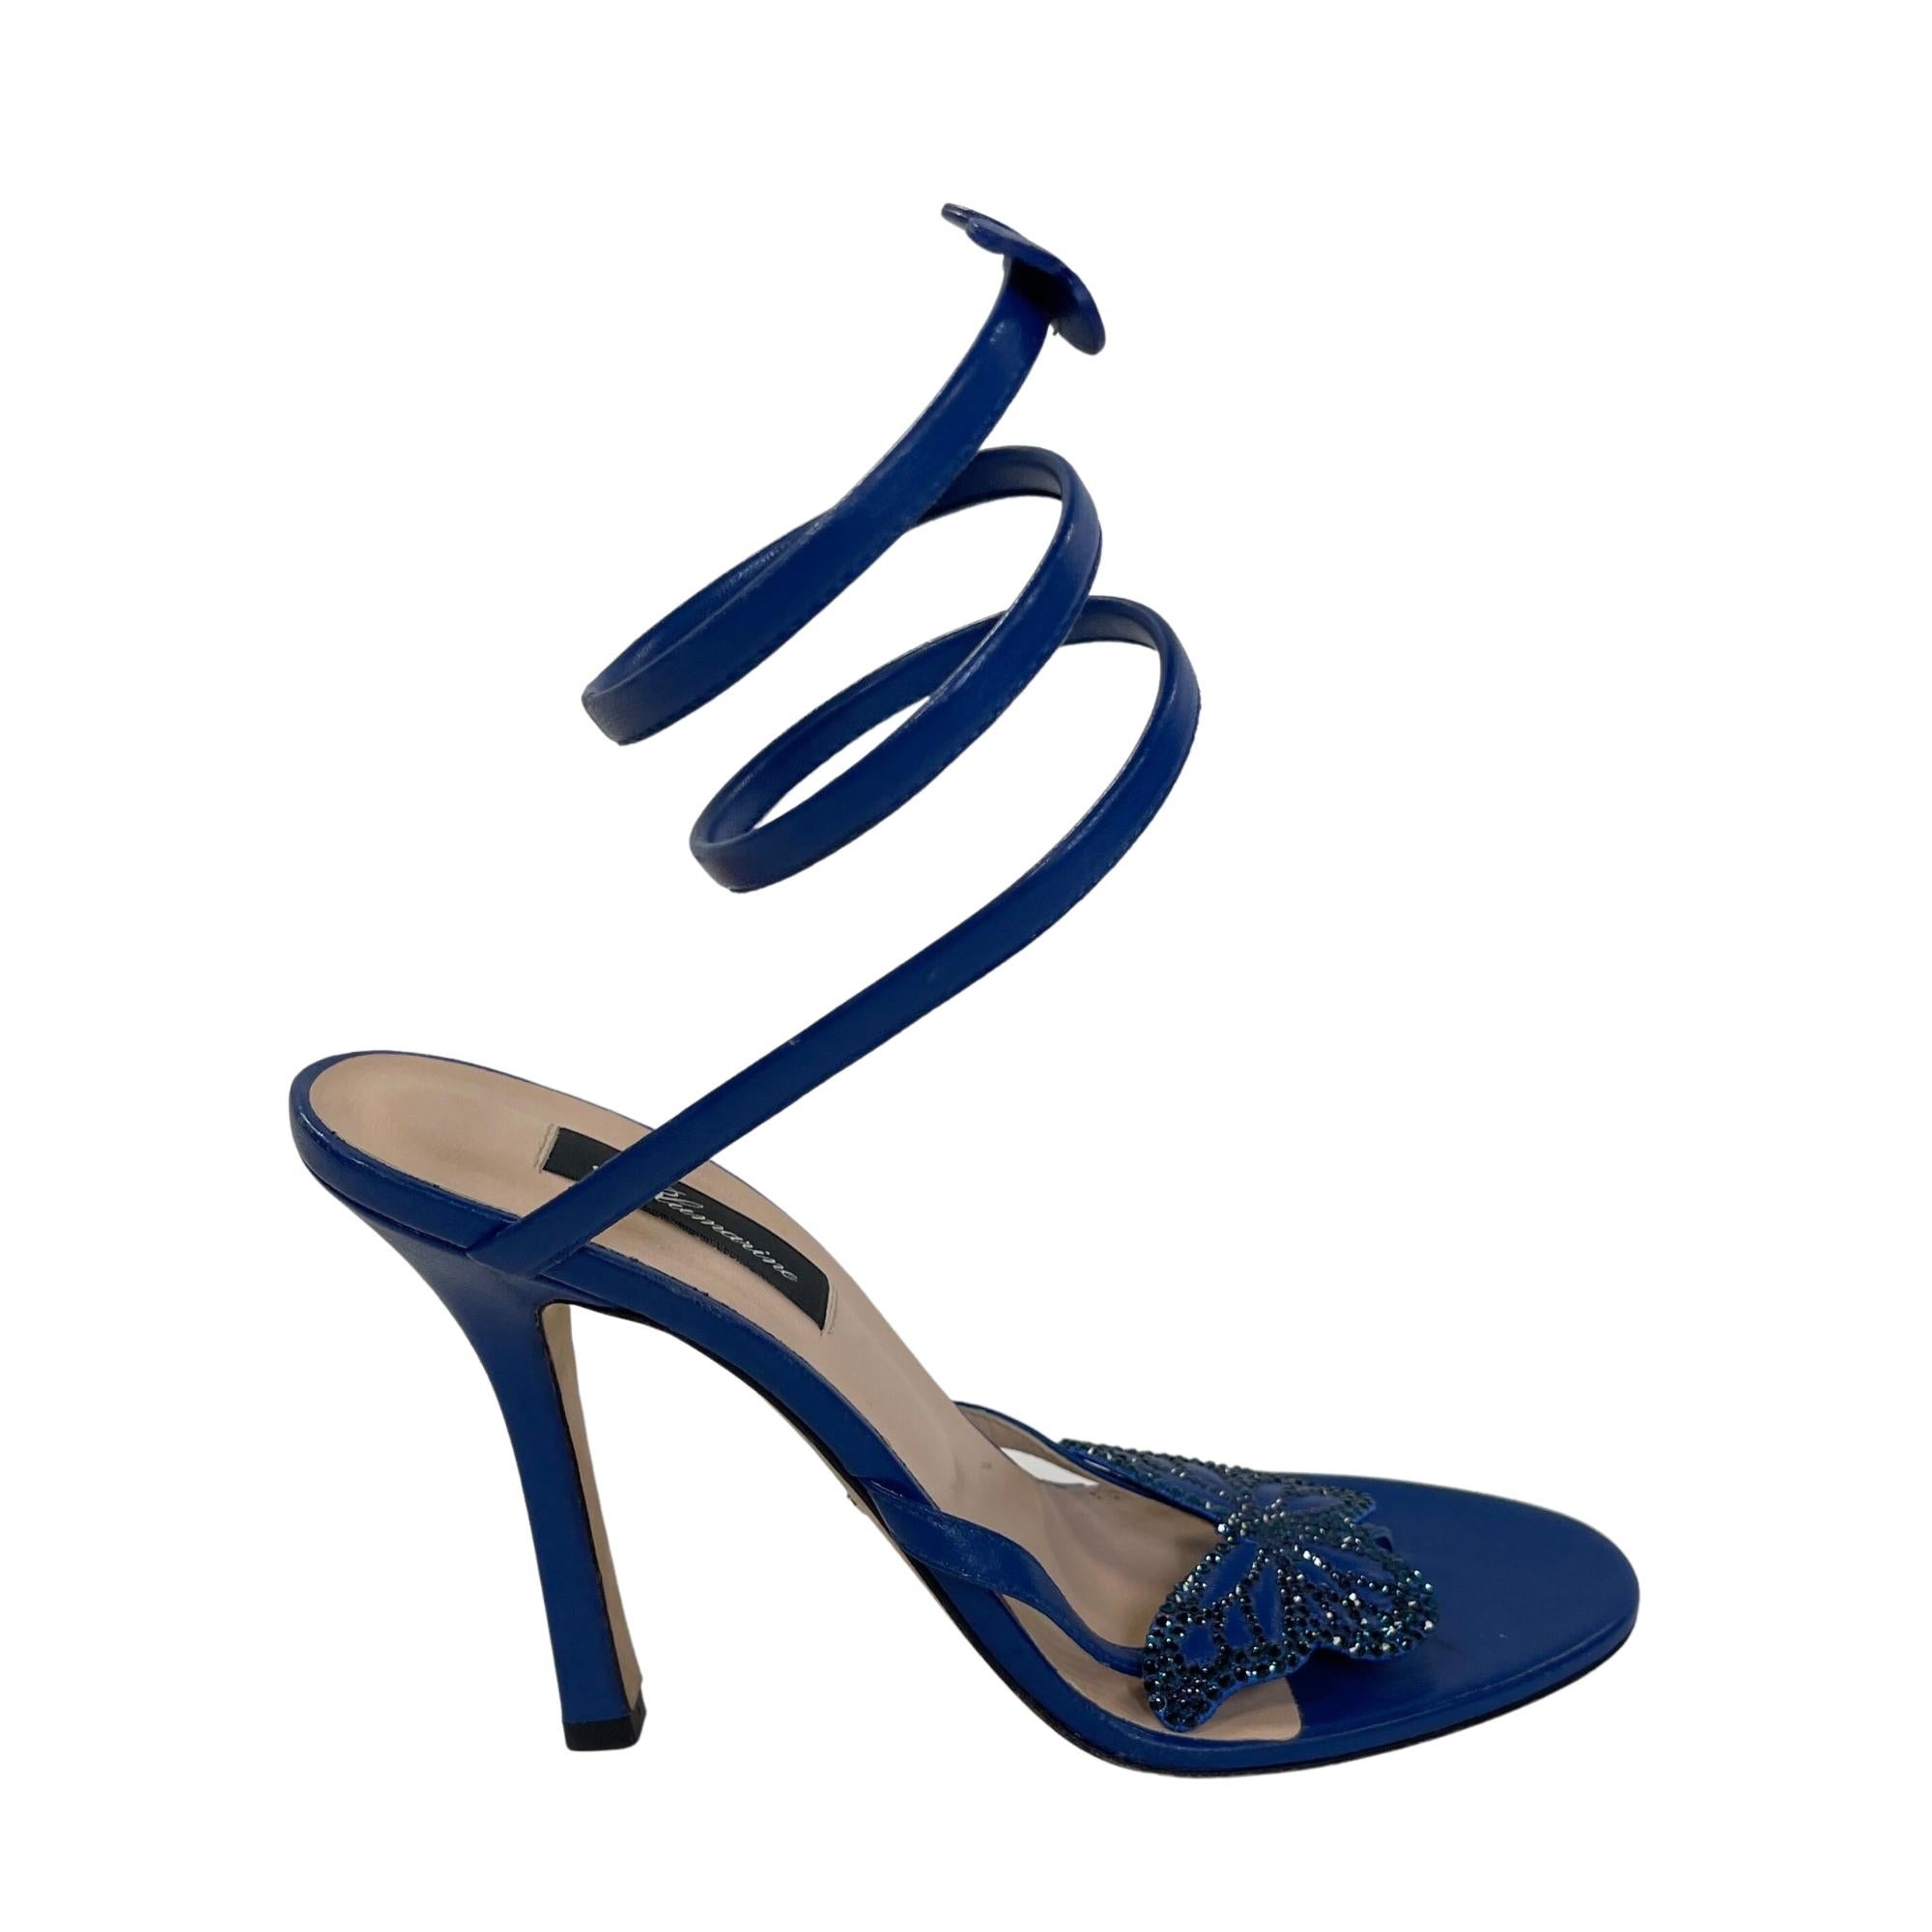 Blumarine Butterfly Blue Heels (EU 40) In Good Condition For Sale In Montreal, Quebec